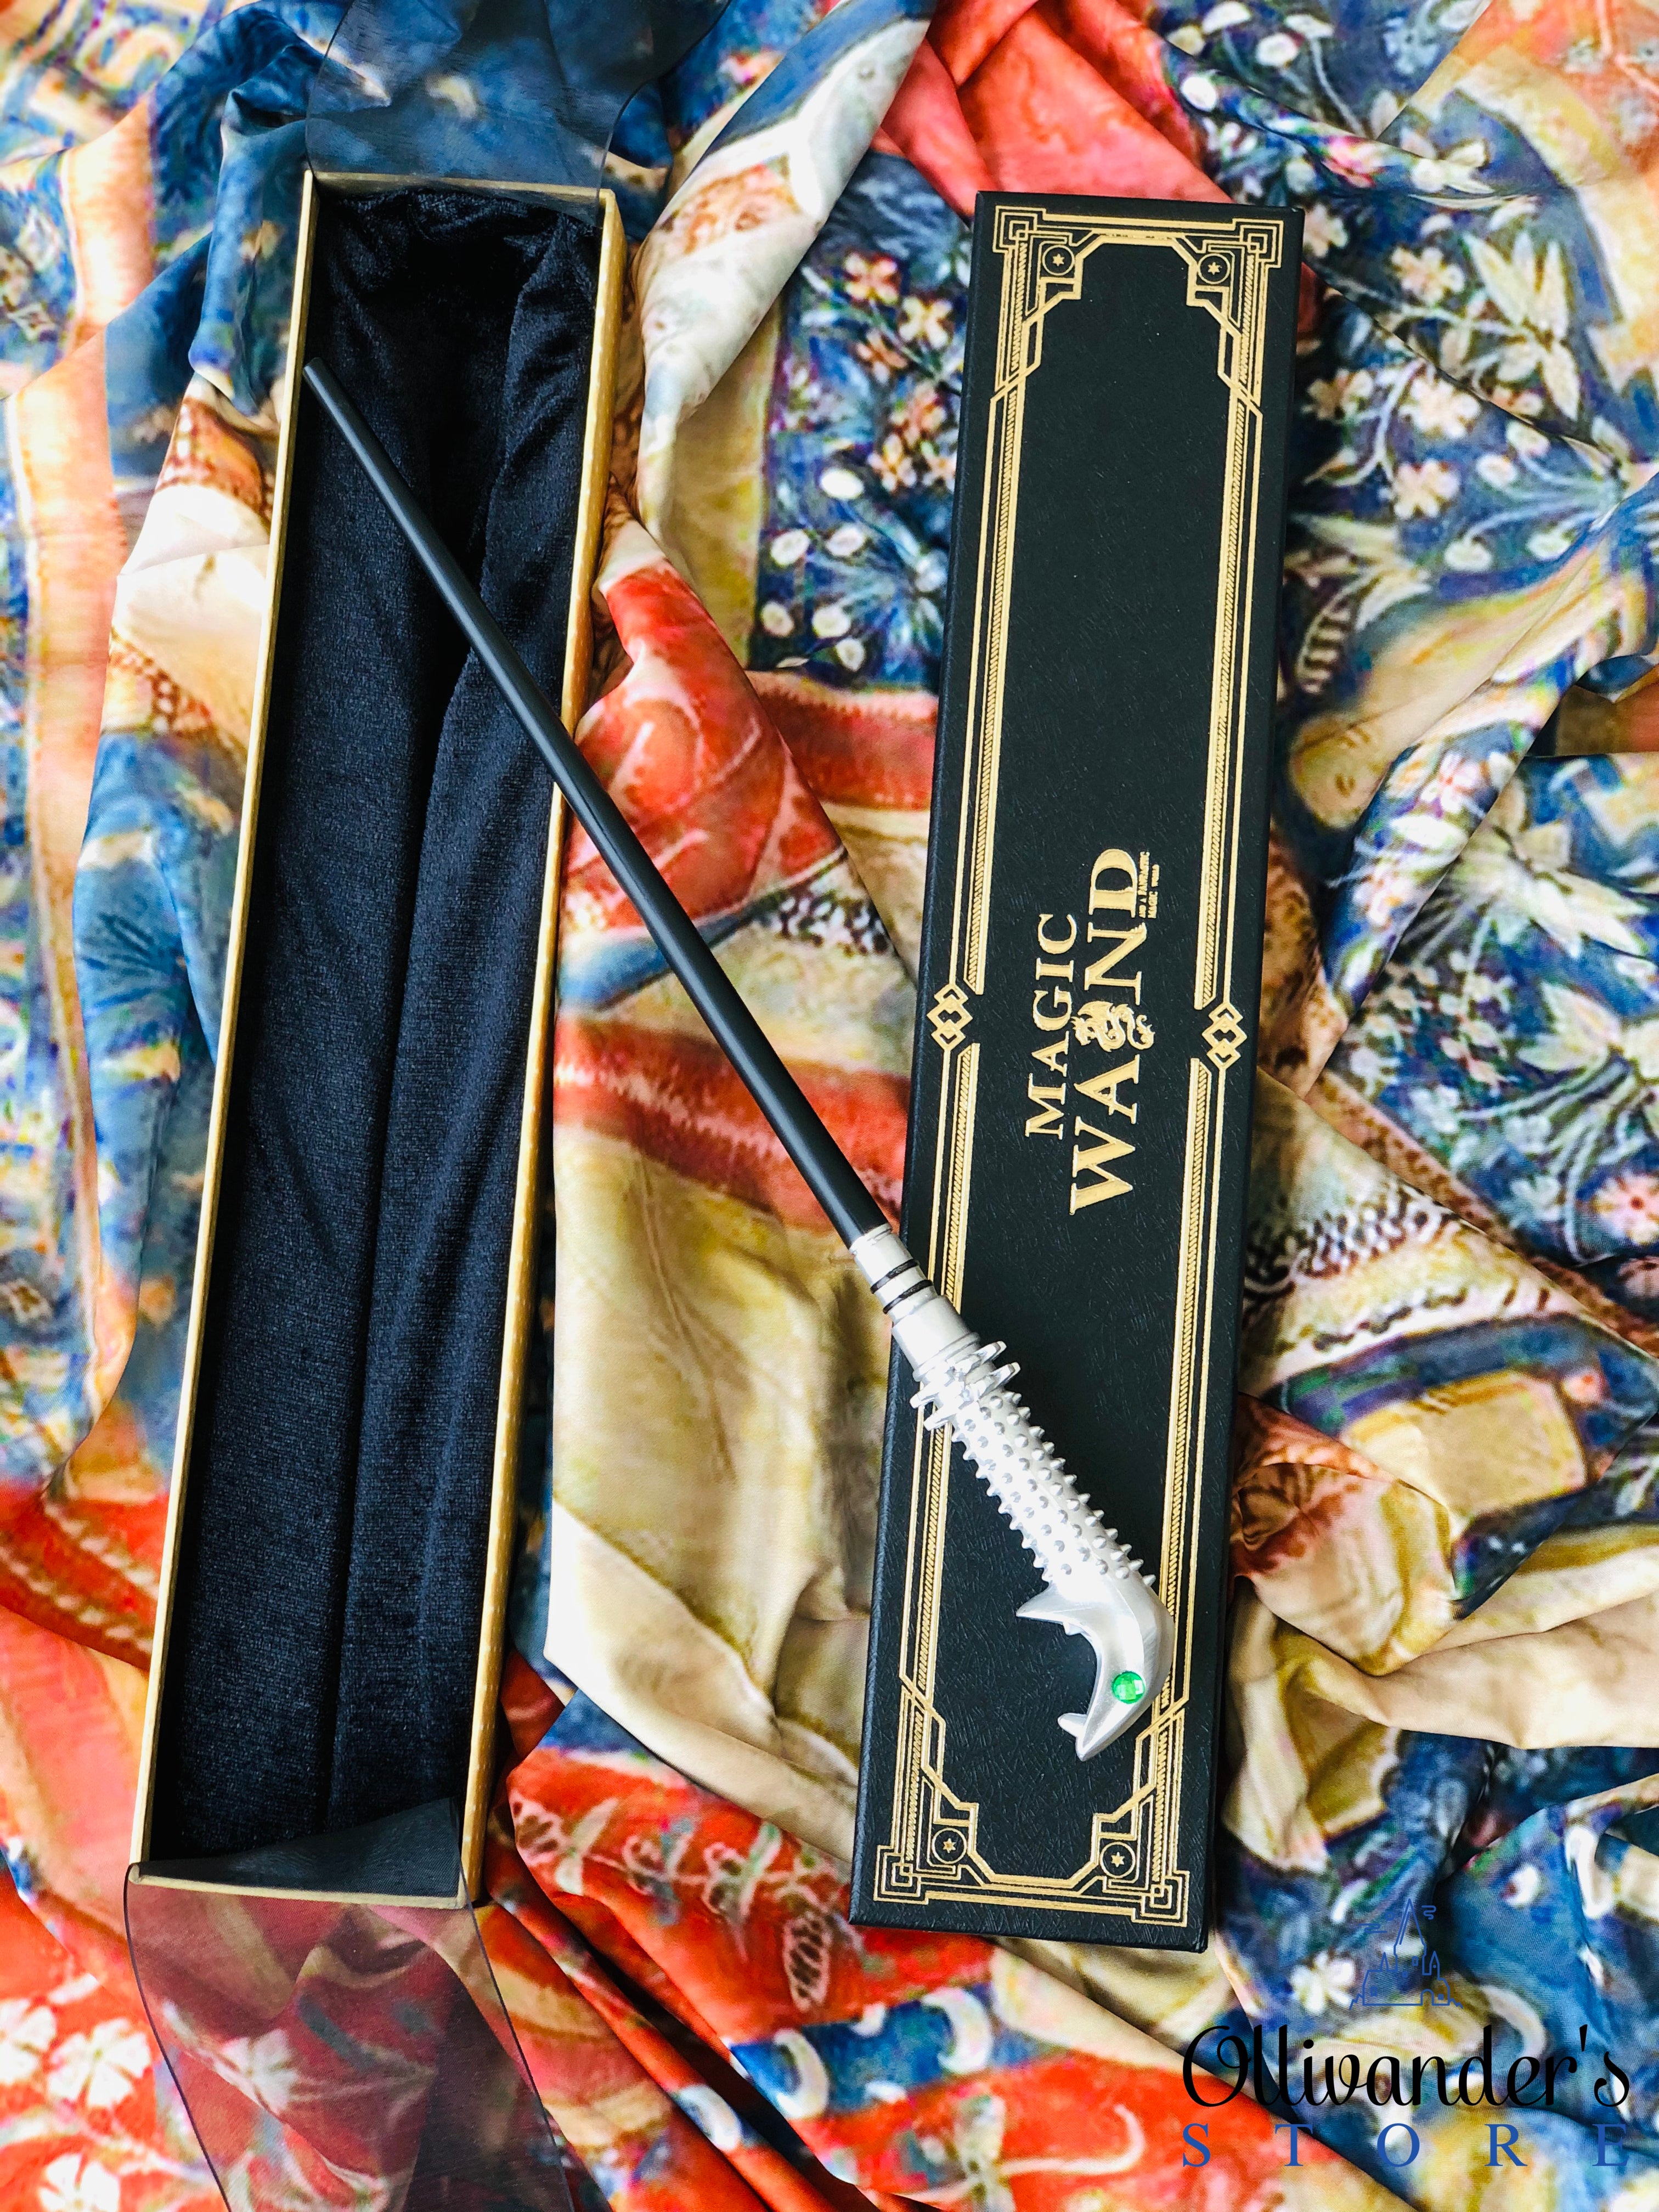 Lucius Malfoy's collectible wand